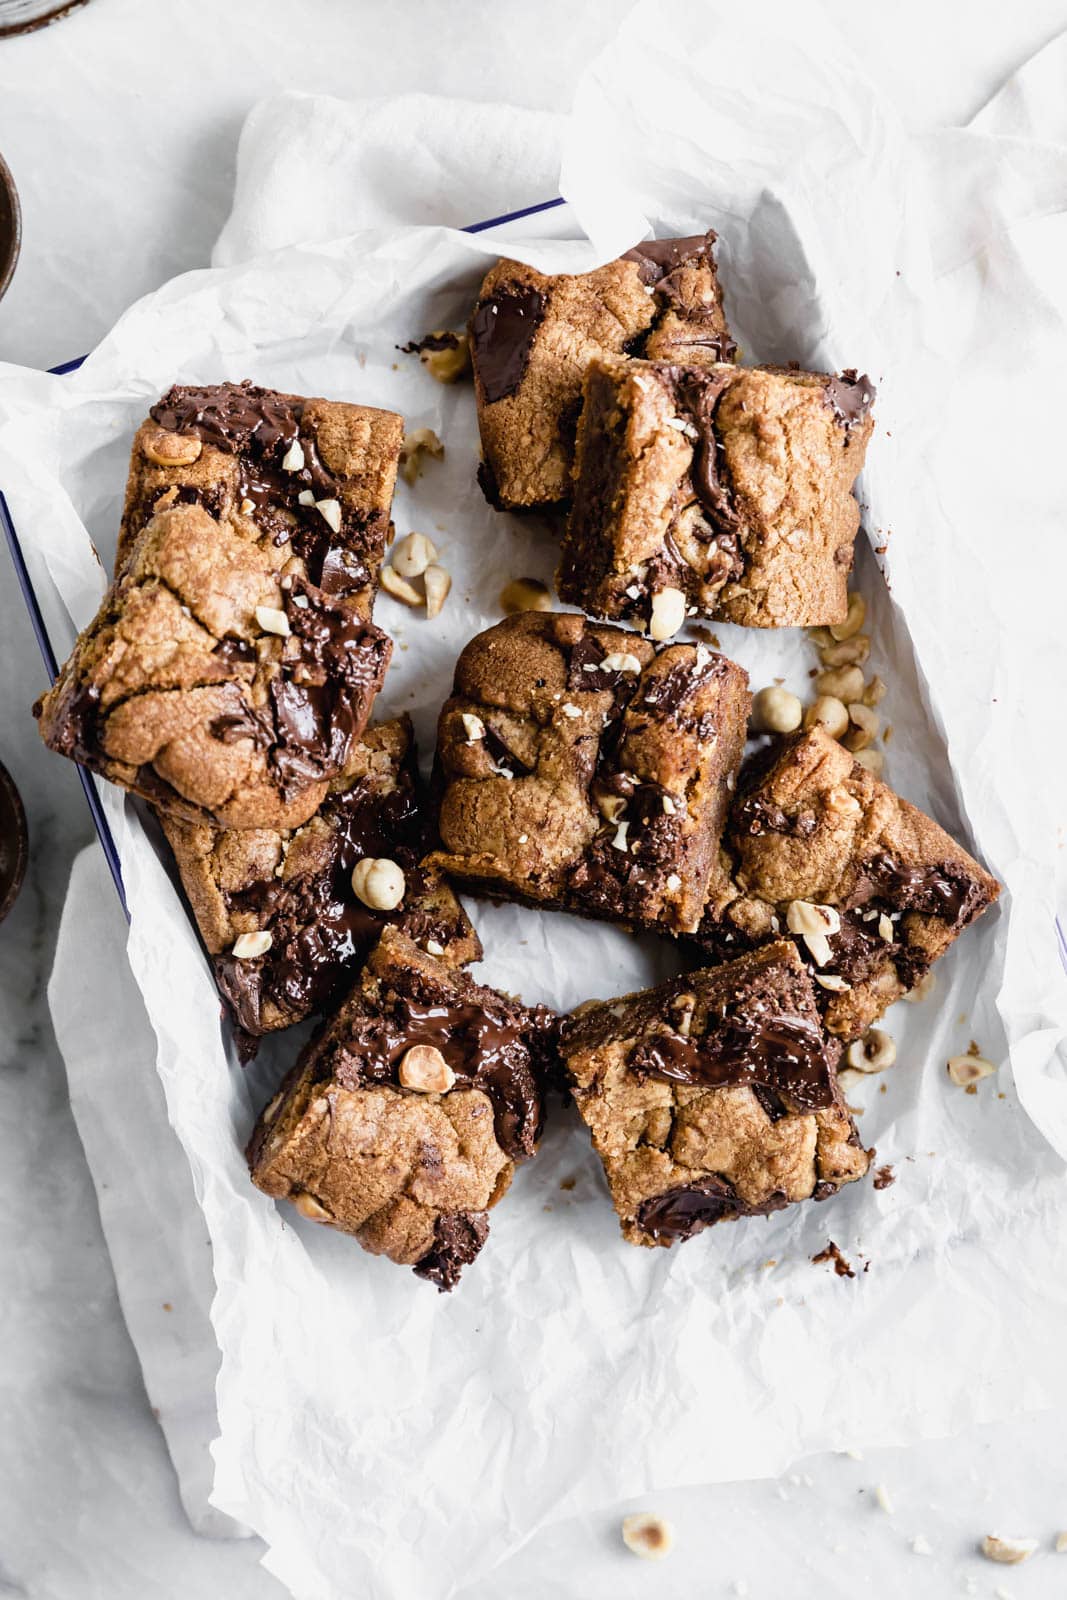 Brown Butter Nutella Chocolate Chip Cookie Bars with fat swirls of Nutella and lightly toasted hazelnuts. A salty sweet treat sure to be a showstopper.